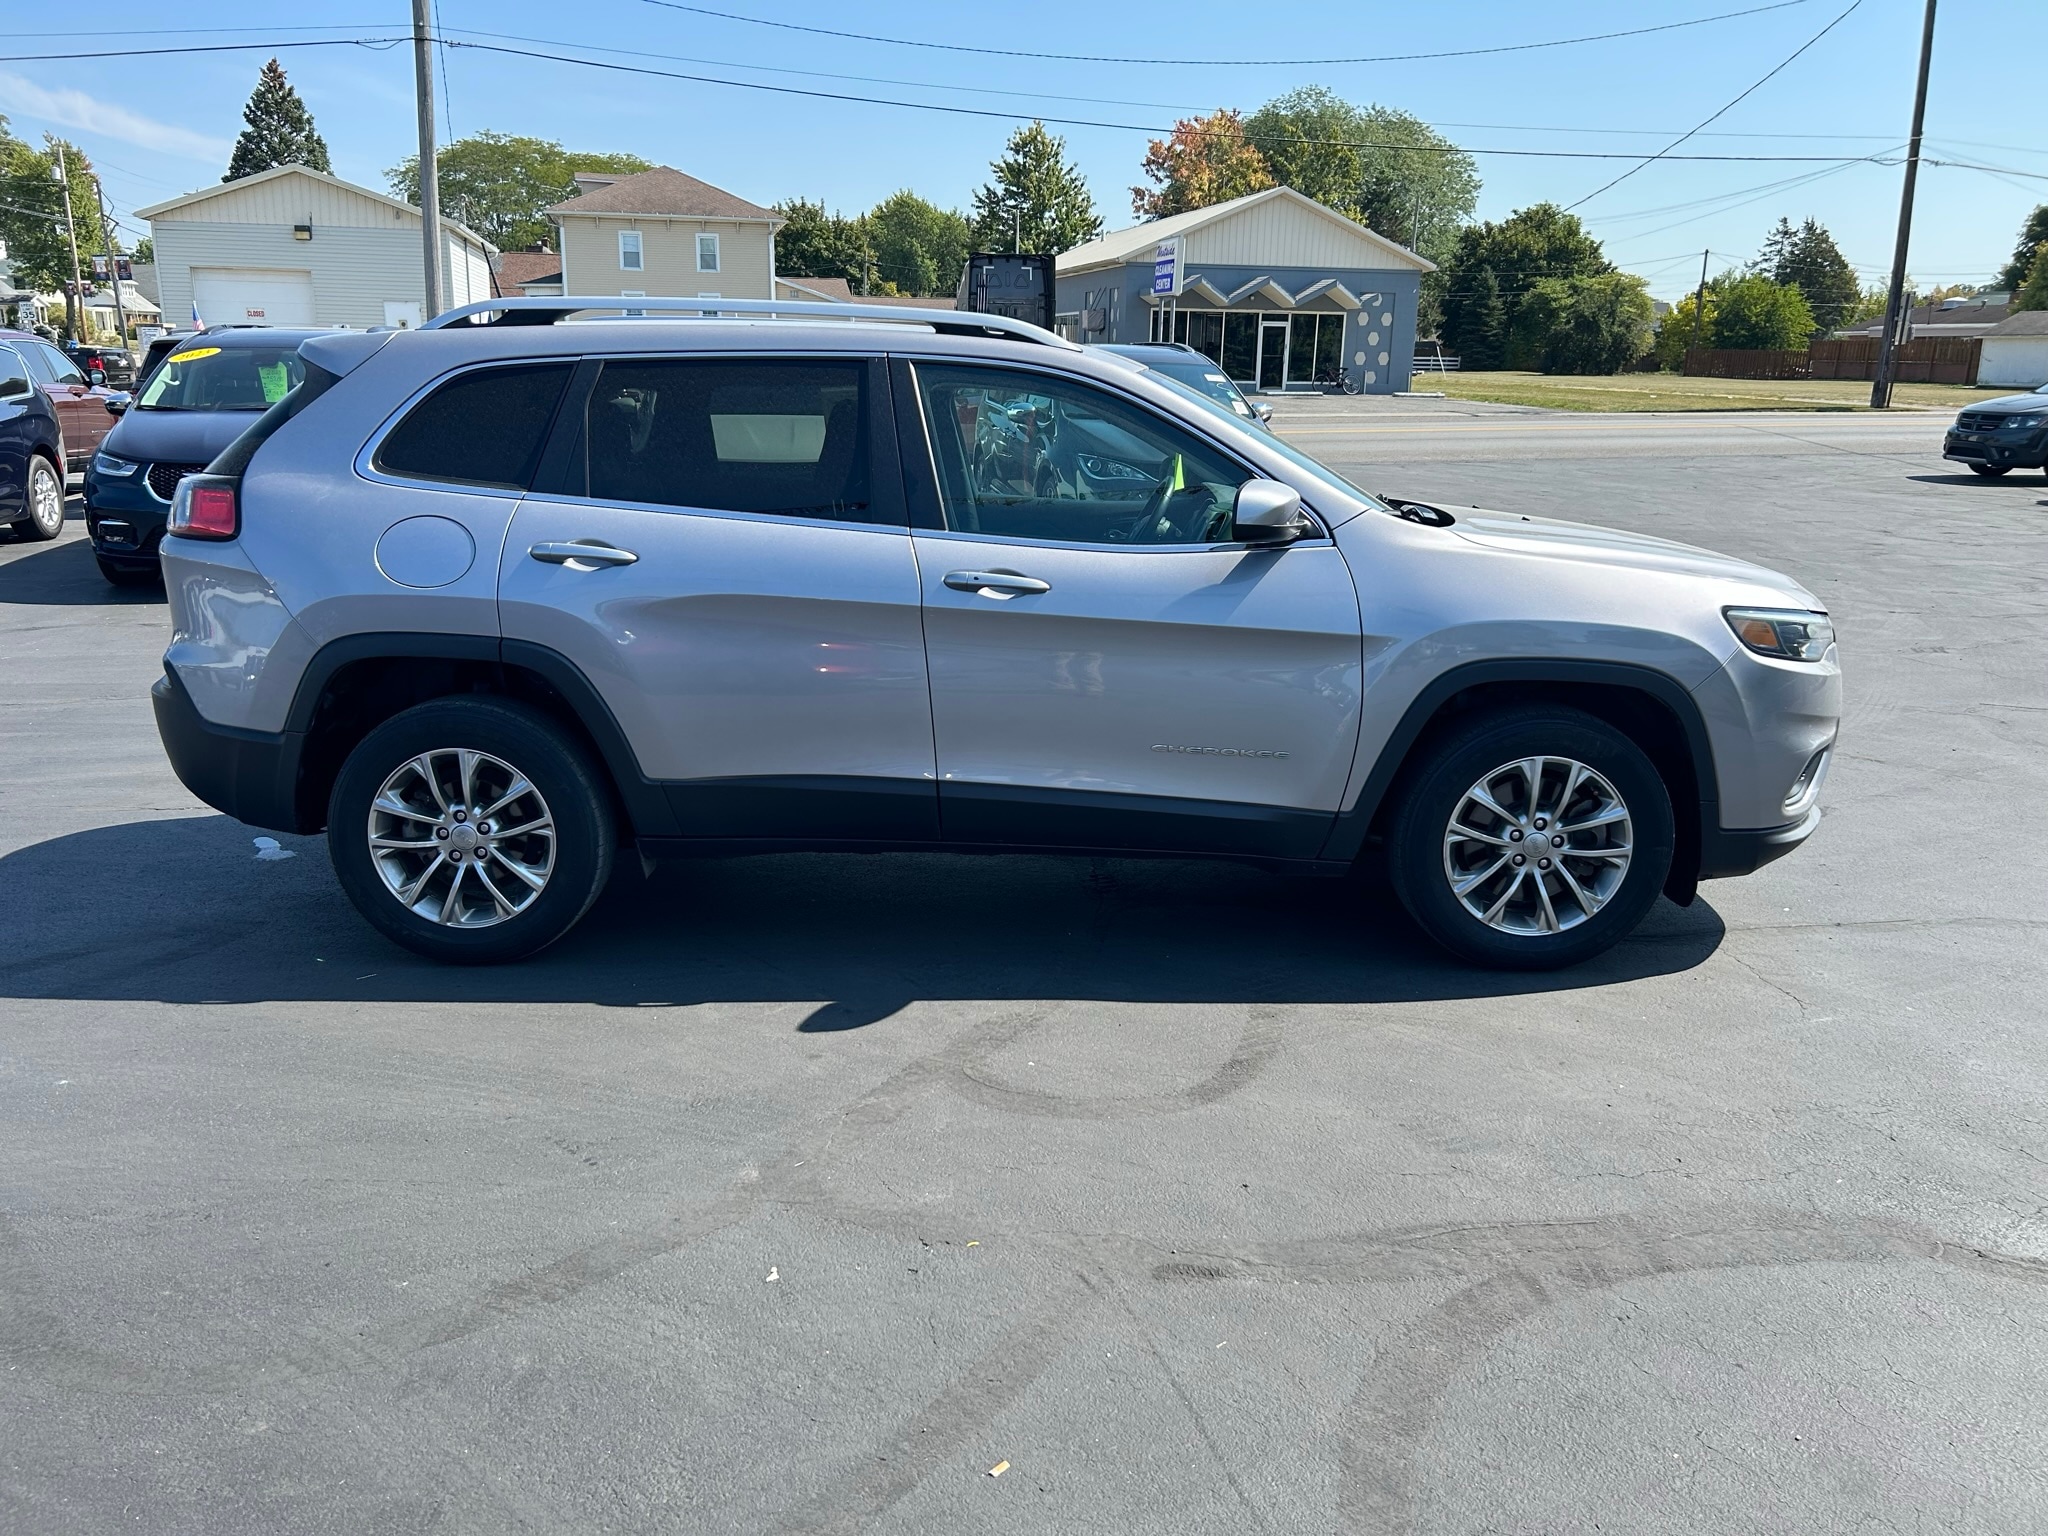 Used 2019 Jeep Cherokee Latitude Plus with VIN 1C4PJLLB6KD262661 for sale in Delphos, OH